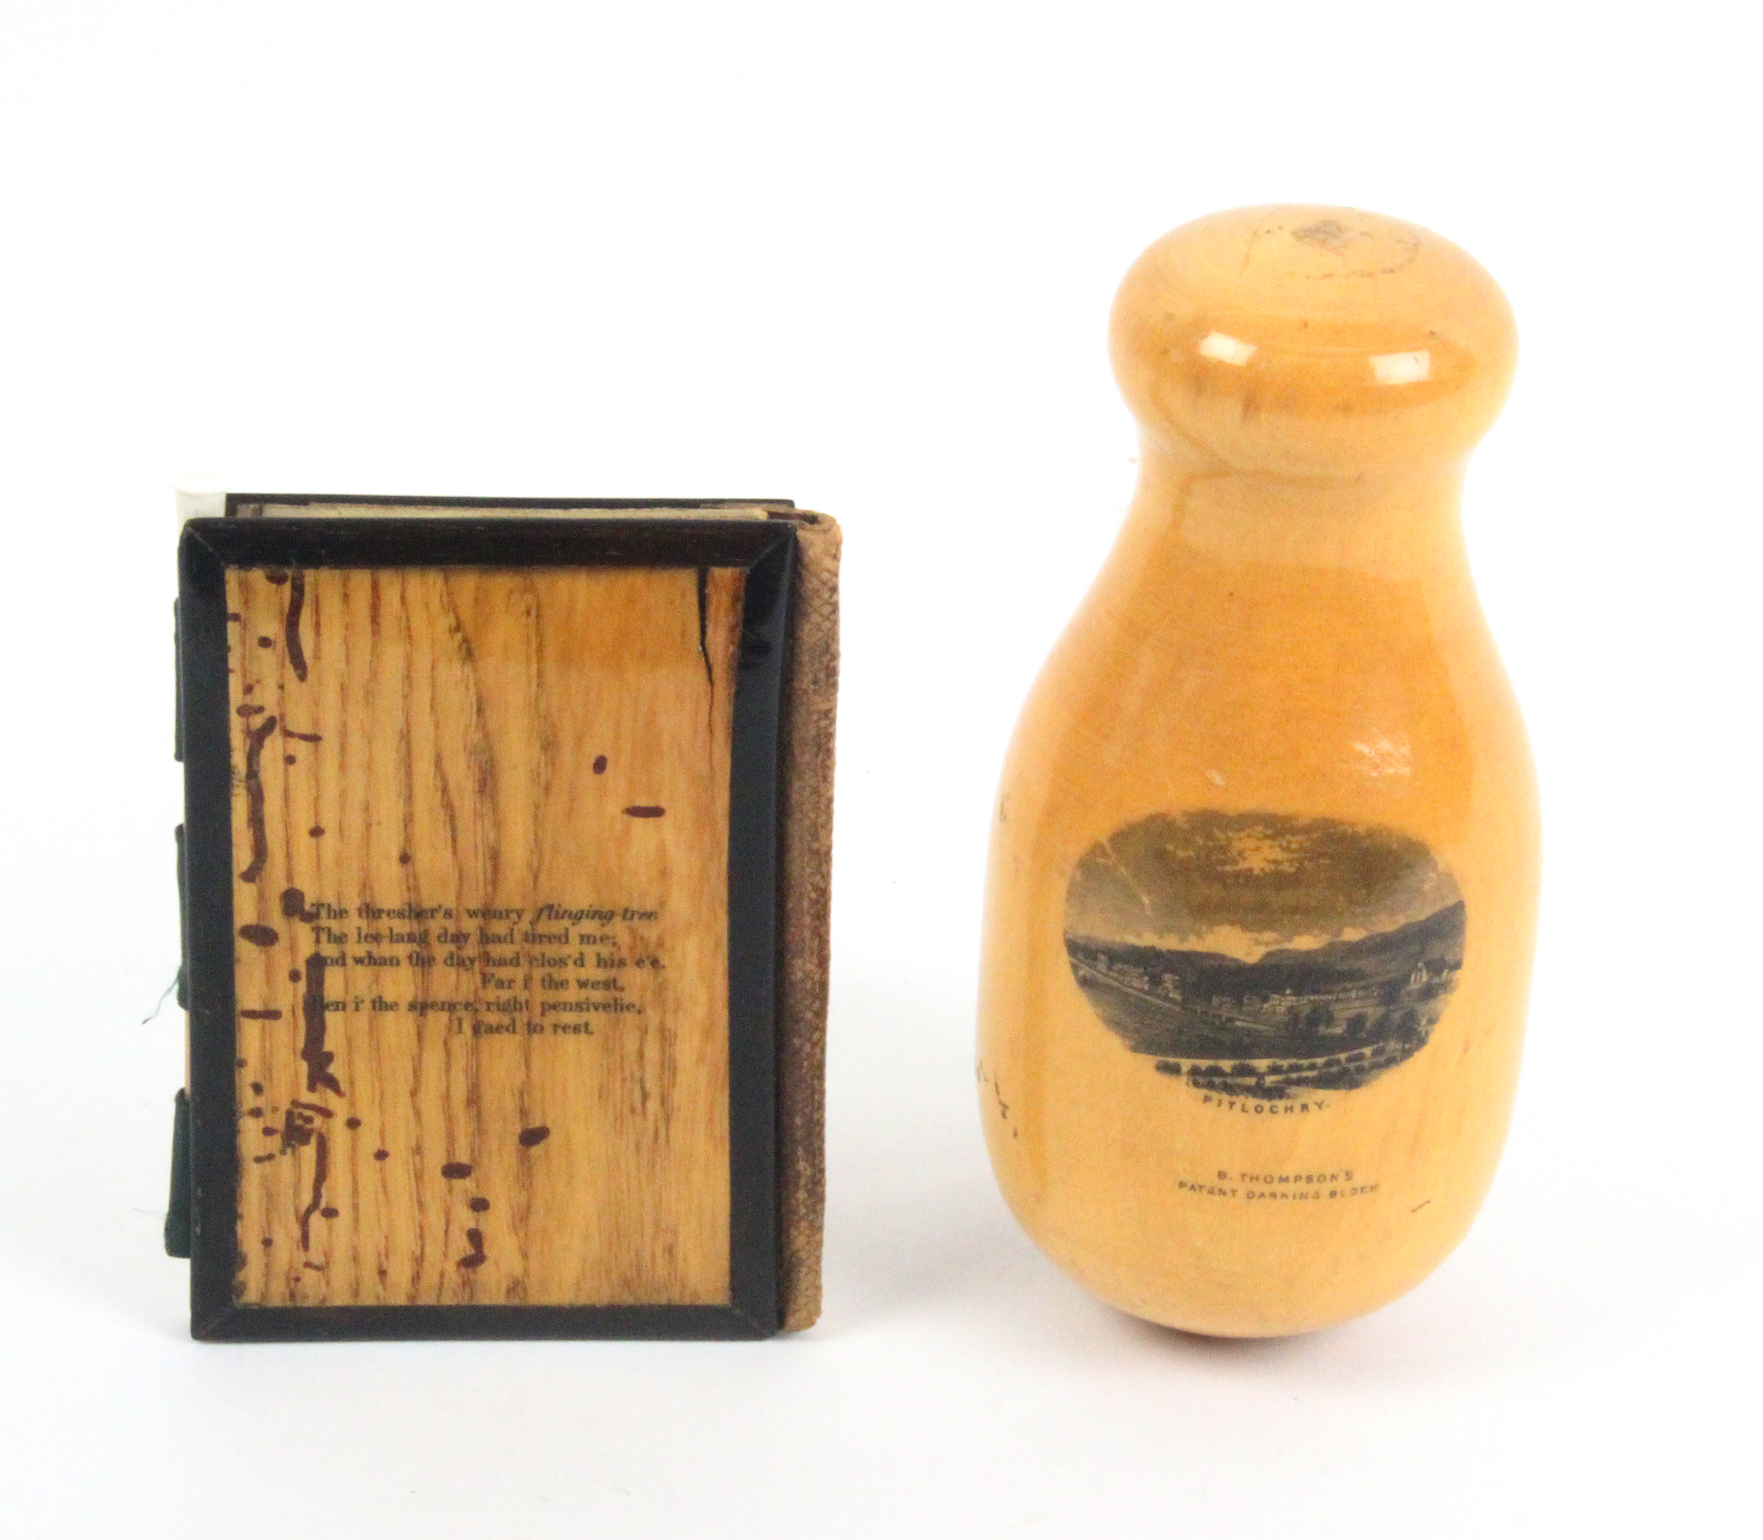 Mauchline ware - two unusual pieces comprising a bottle form Patent darner (B Thompson's Patent